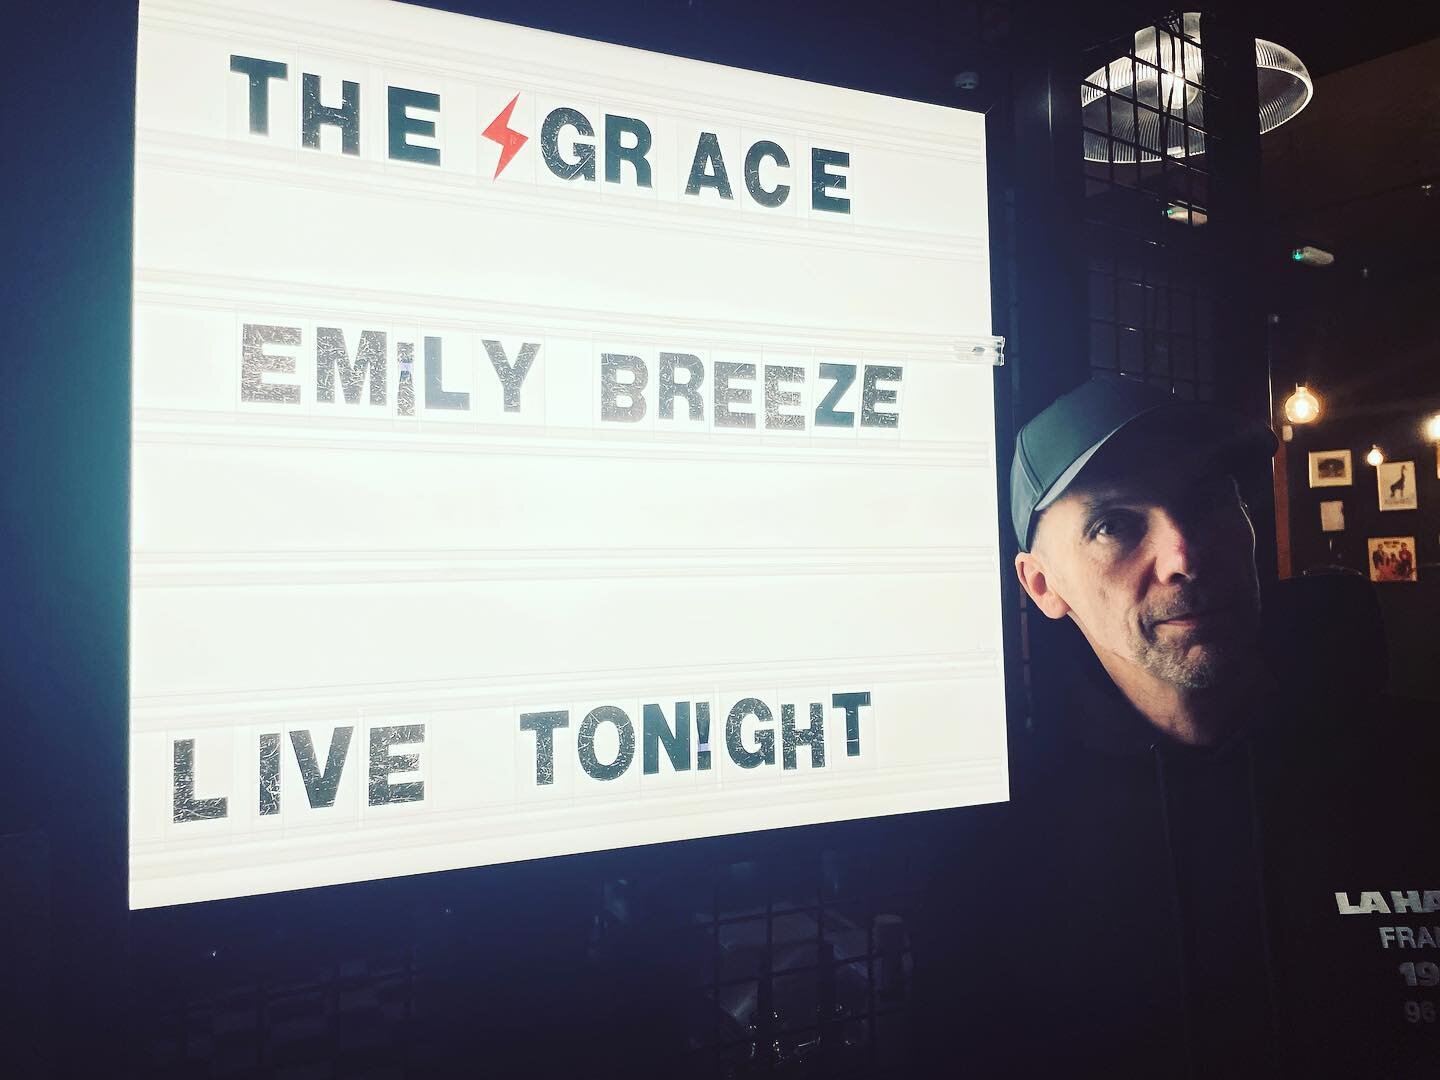 Emily Breeze if you please

It's almost the end of the tour but her star is on the rise. Perfectly pitched performance from our favourite wordsmith. 
A night to remember ⭐️